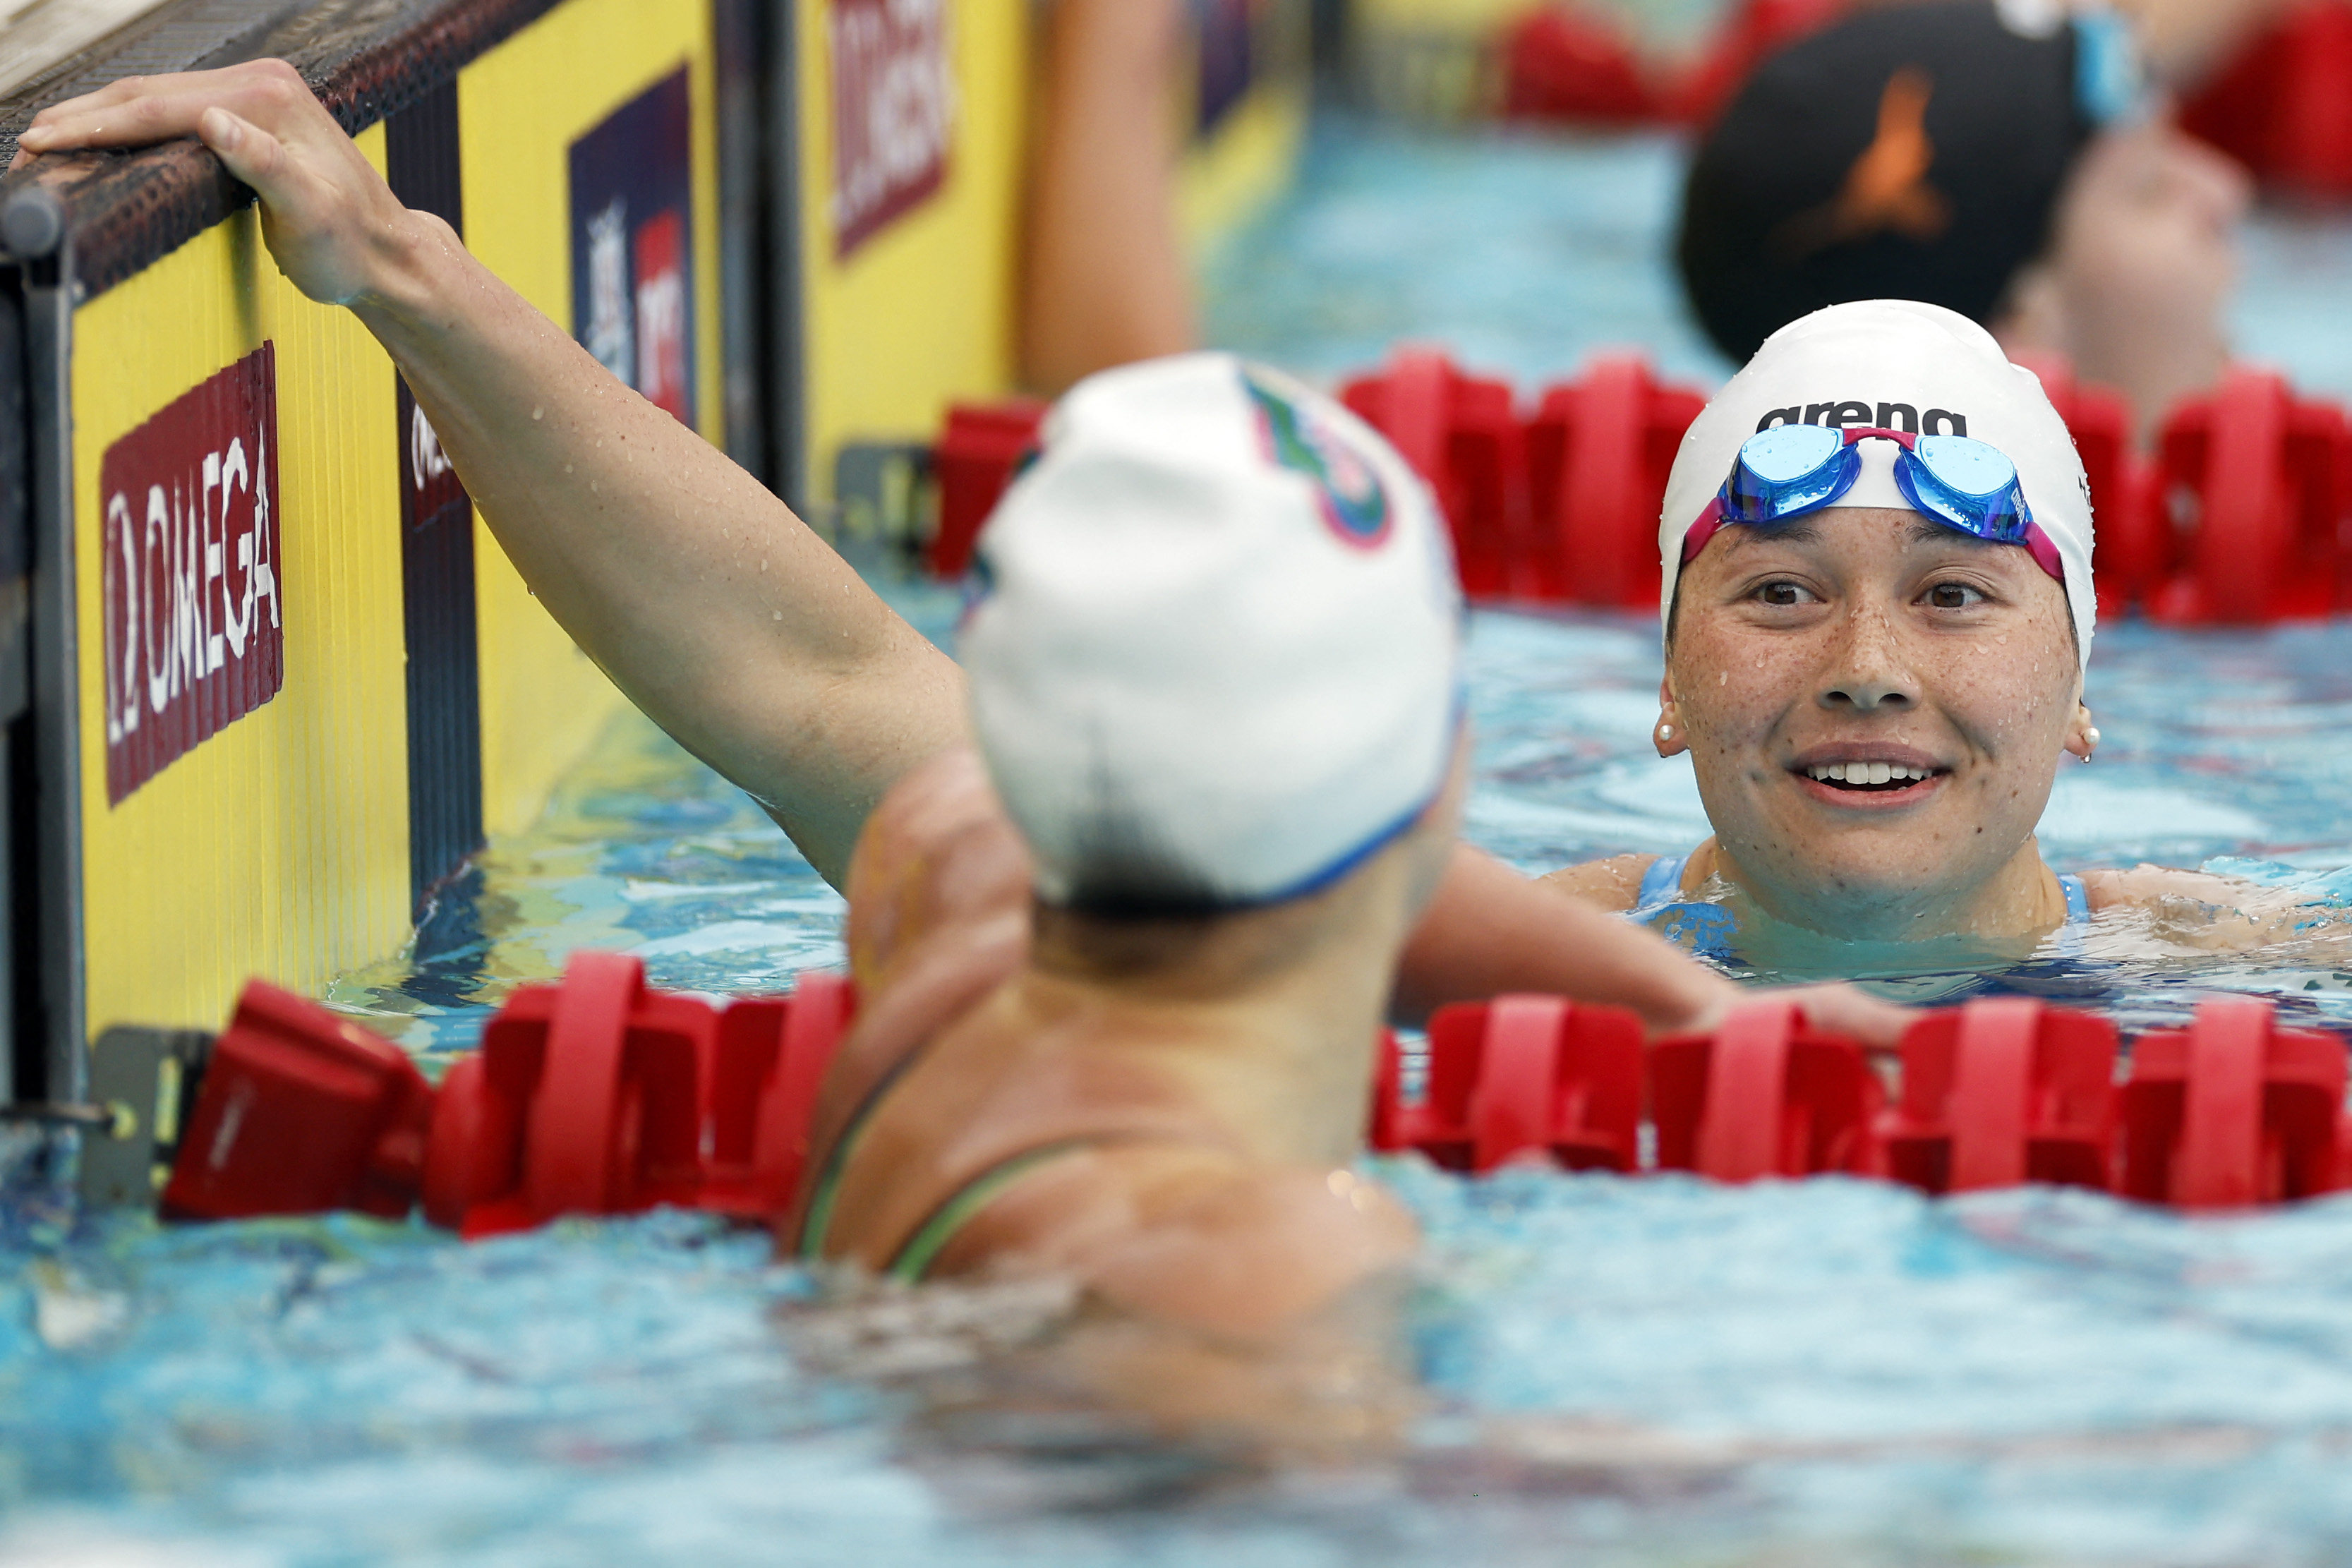 Siobhan Haughey wins the 200m freestyle final in San Antonio. Photo: Getty Images via AFP